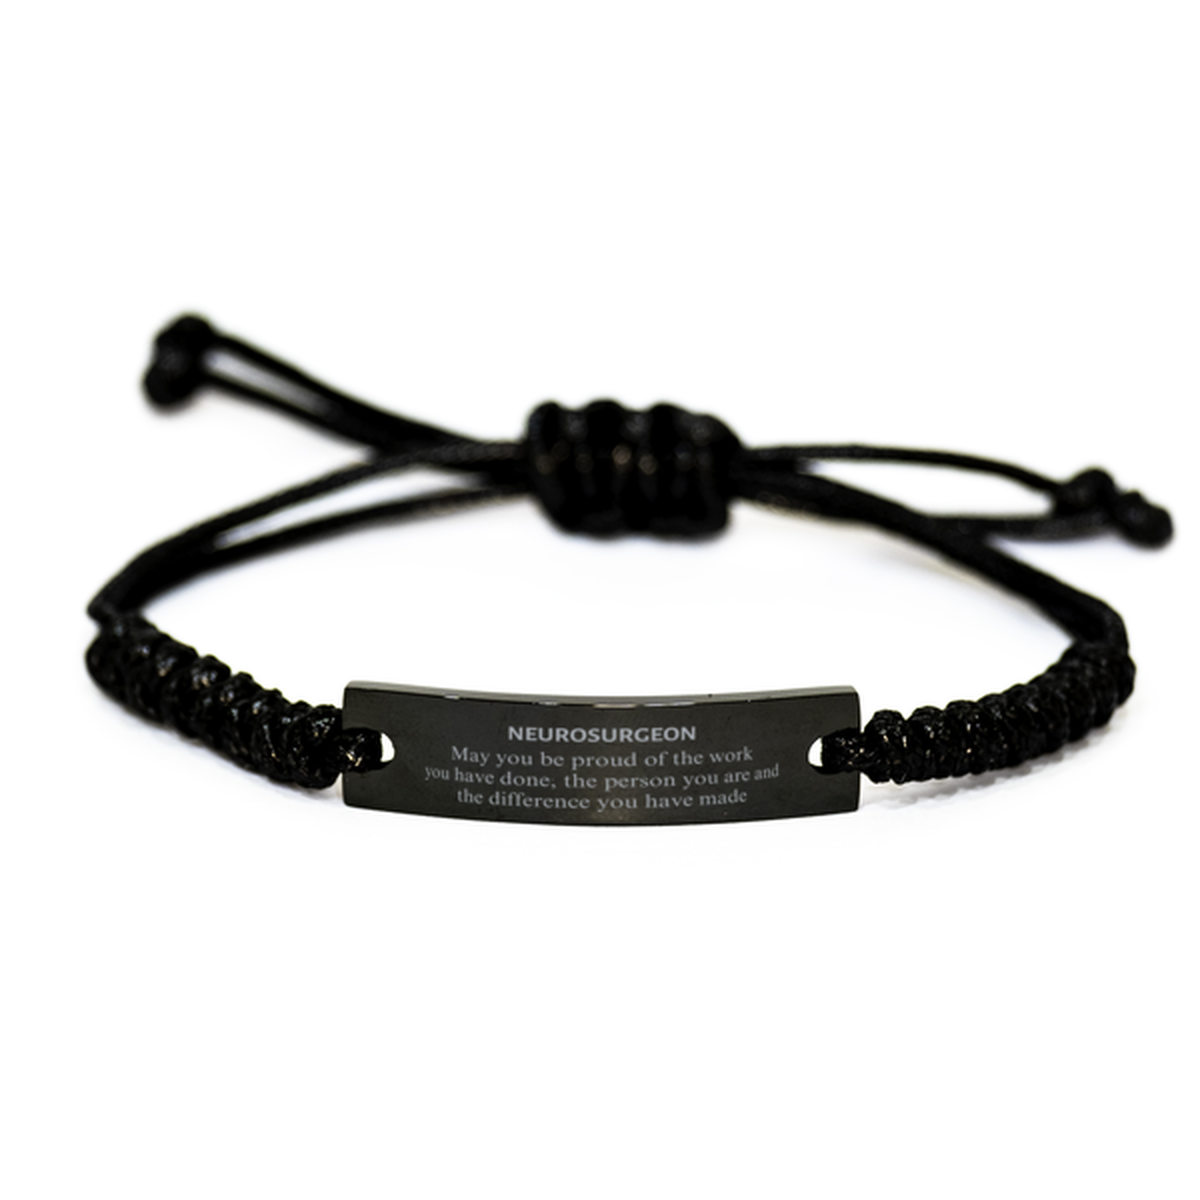 Neurosurgeon May you be proud of the work you have done, Retirement Neurosurgeon Black Rope Bracelet for Colleague Appreciation Gifts Amazing for Neurosurgeon